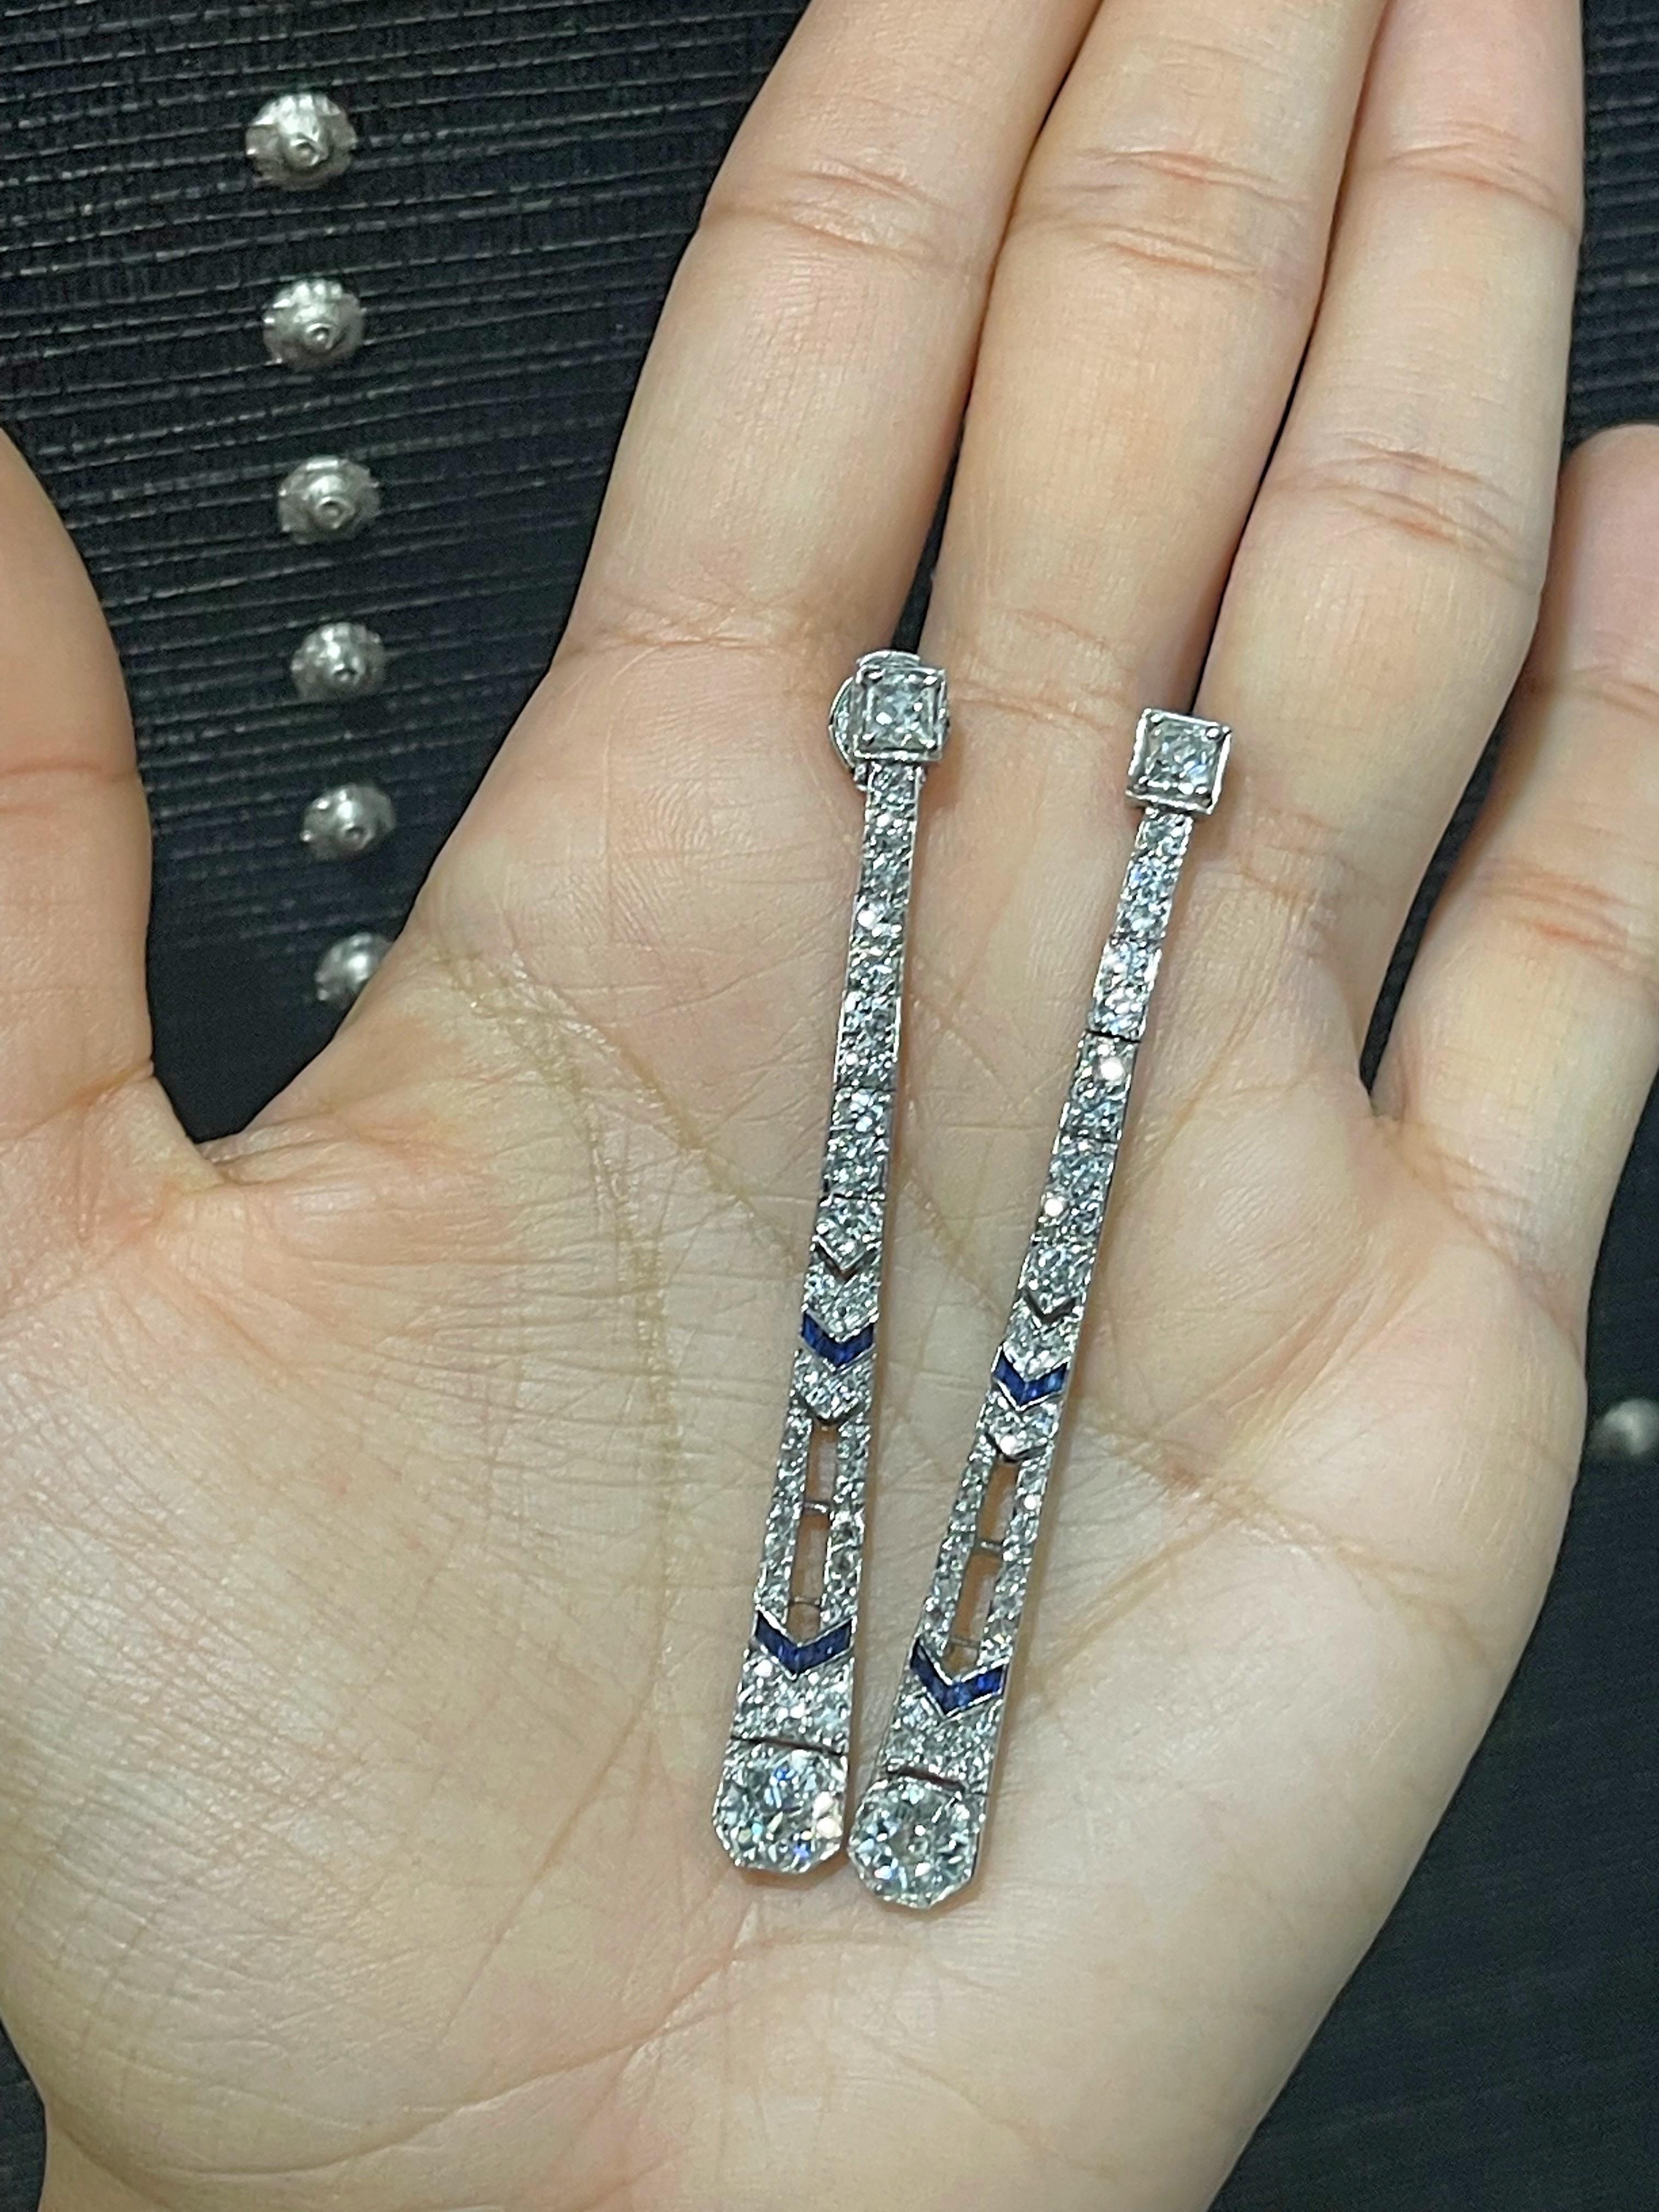 One of a kind French Art Deco Style custom long dangle show stoppers!
Approx 4 CWT diamonds “chevron like pattern”
2 old European cut (bottom), 2 French cut (top), 20 round brilliant, 24 semi-faceted and 22 single cut (surrounding)

16 step cut